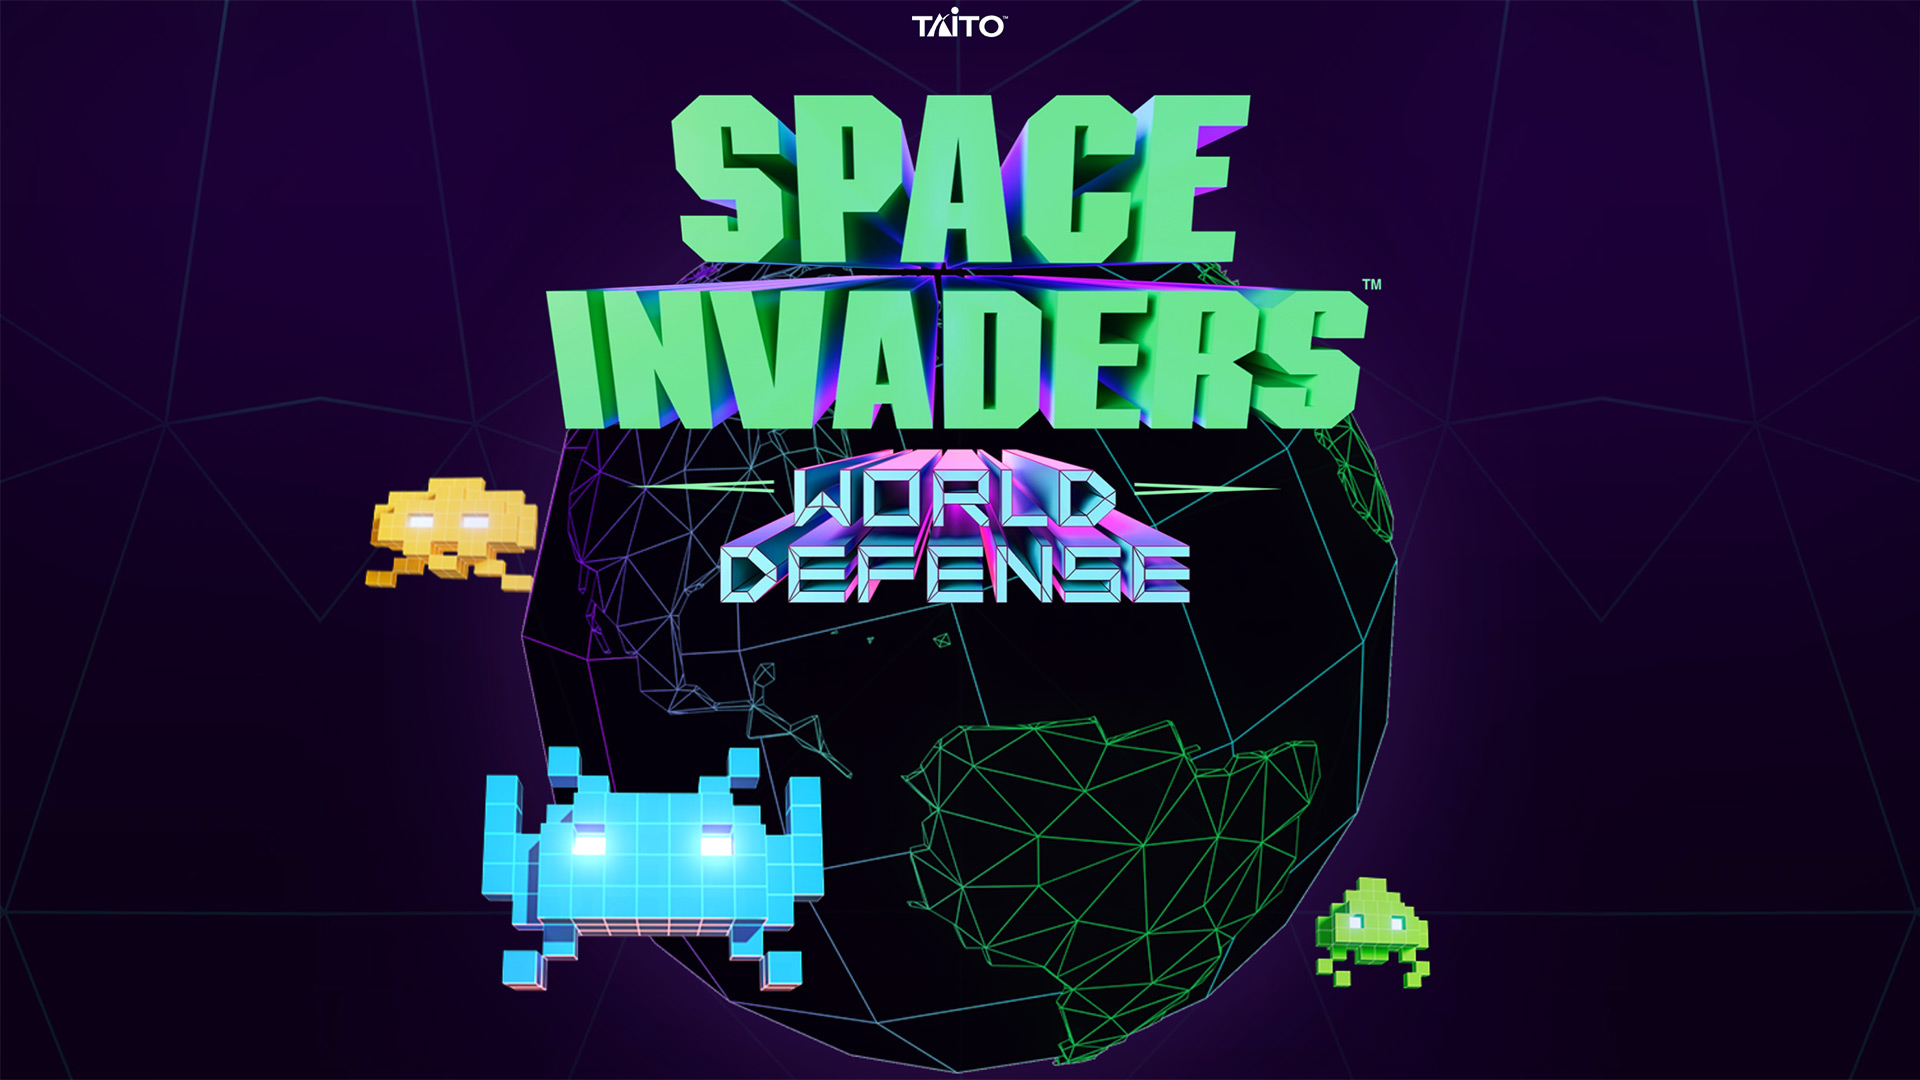 Space Invaders: World Defense launches today on mobile devices